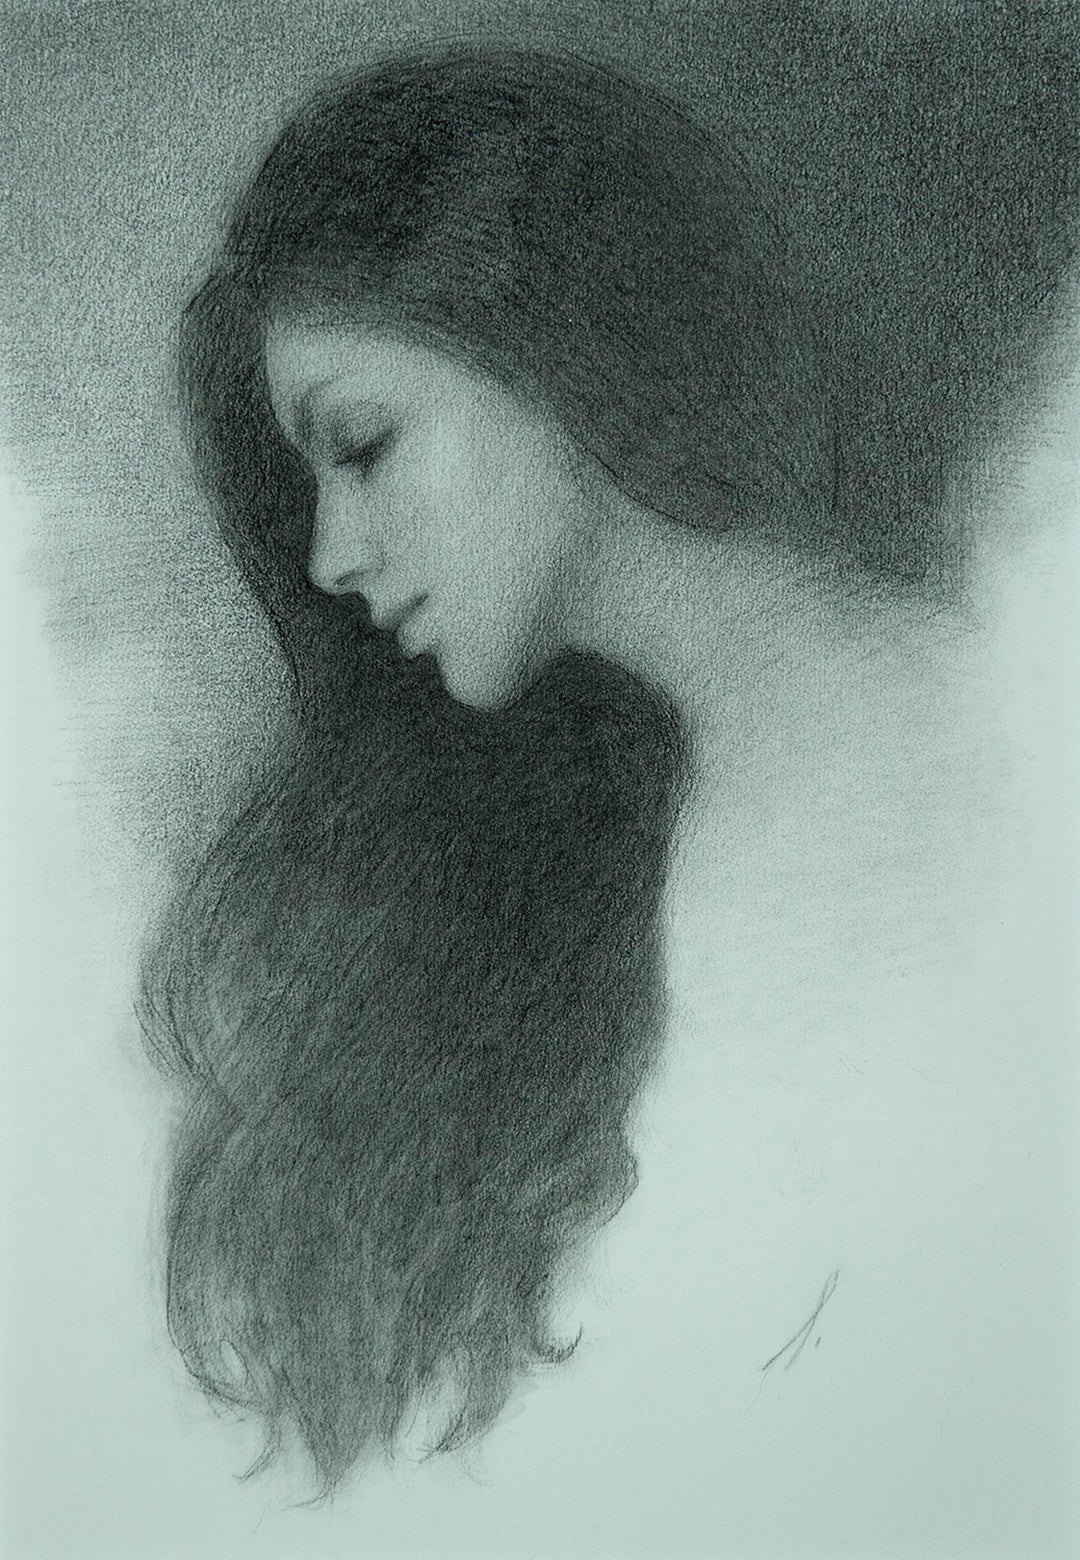 A charcoal drawing of a woman with long hair created by the artist Mark Bradley Schwartz, titled "Untitled 12" from the brand Mark Bradley Schwartz.